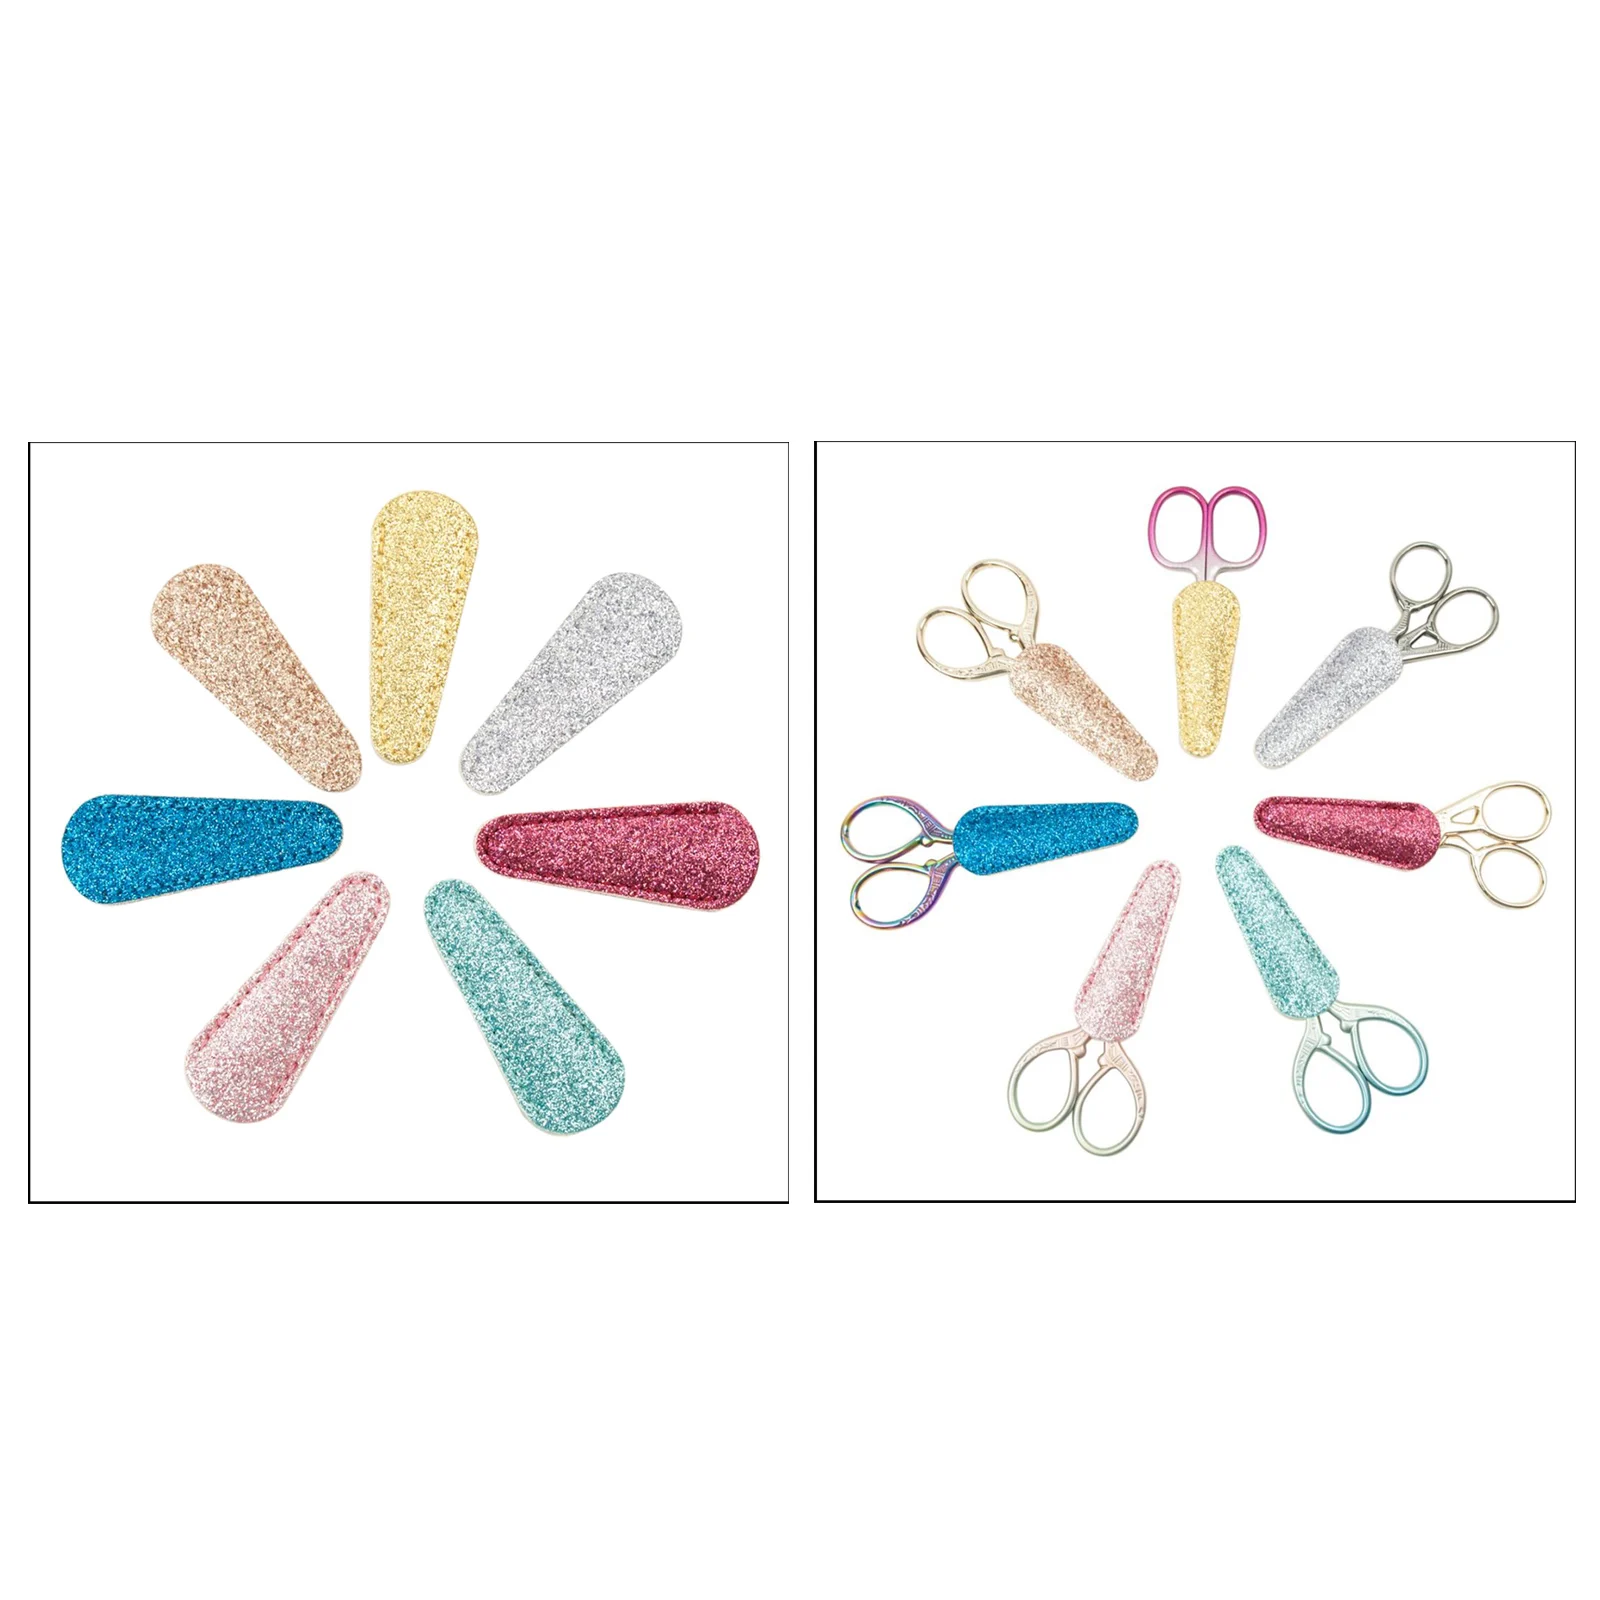 7 Pcs Leather Sewing Needlework Scissors Sheaths Anti-Hurt Embroidery Scissors Protector Cover Bags